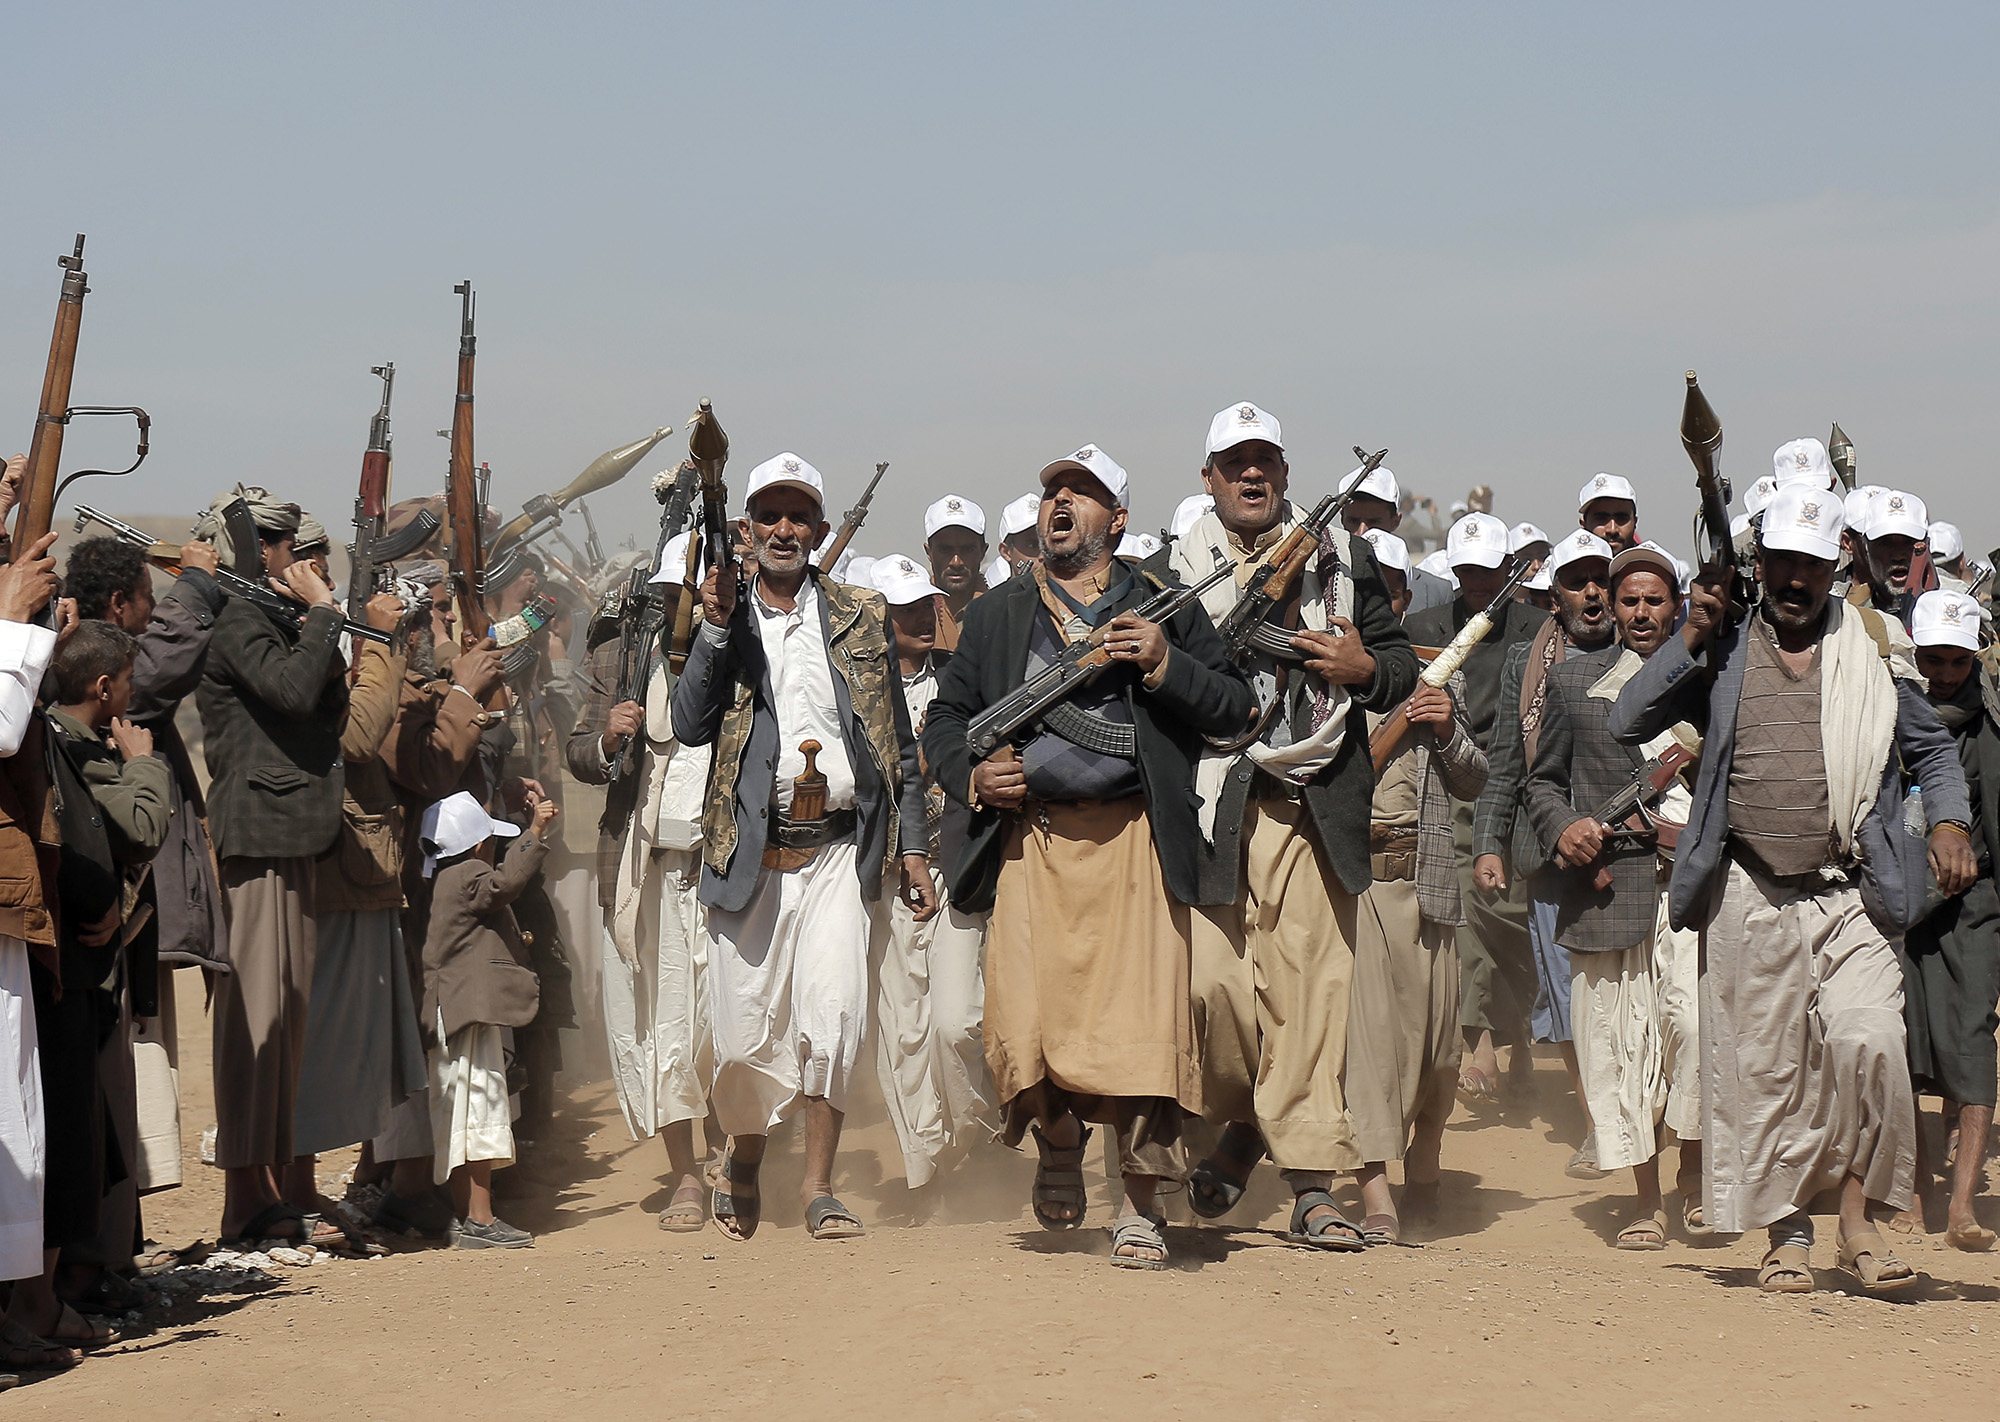 Houthi fighters march during a rally of support for the Palestinians in the Gaza Strip and against the U.S. strikes on Yemen outside Sanaa, Yemen, on January 22.